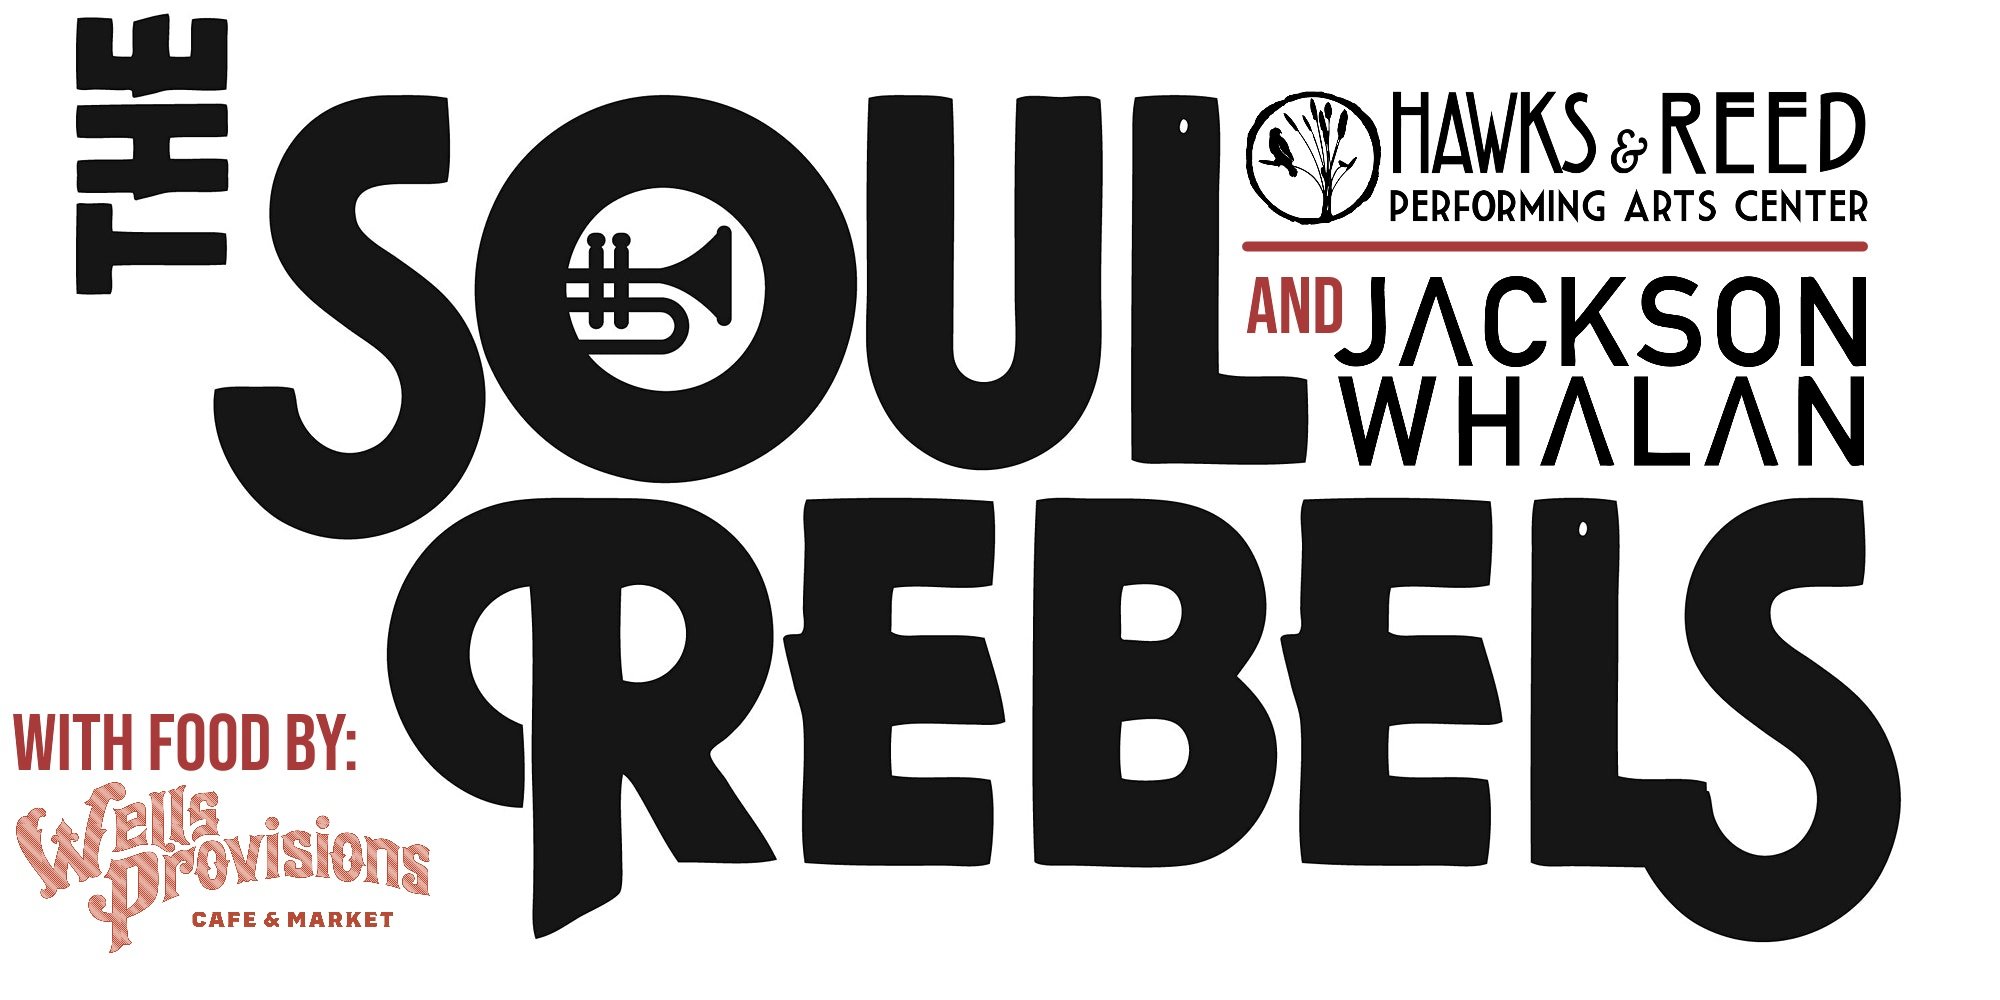 The Soul Rebels and Jackson Whalan at Hawks and Reed